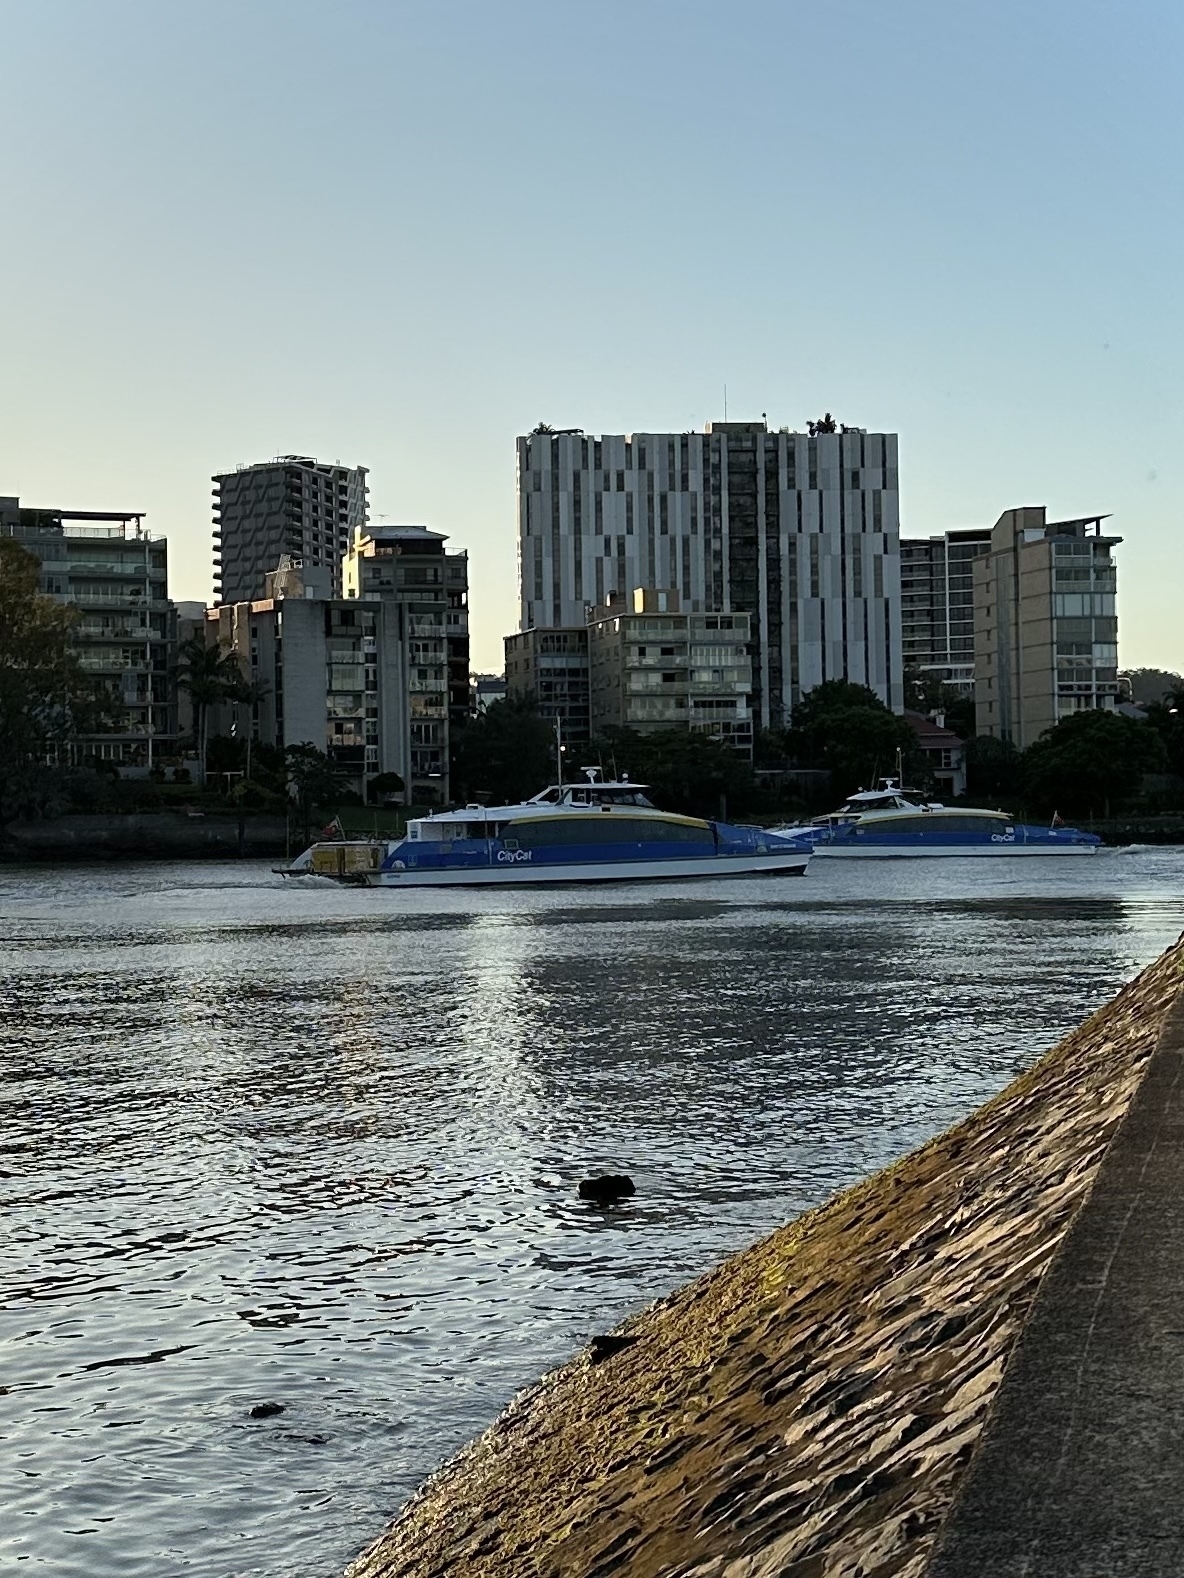 The Brisbane river with two City Cats (ferries) passing each other